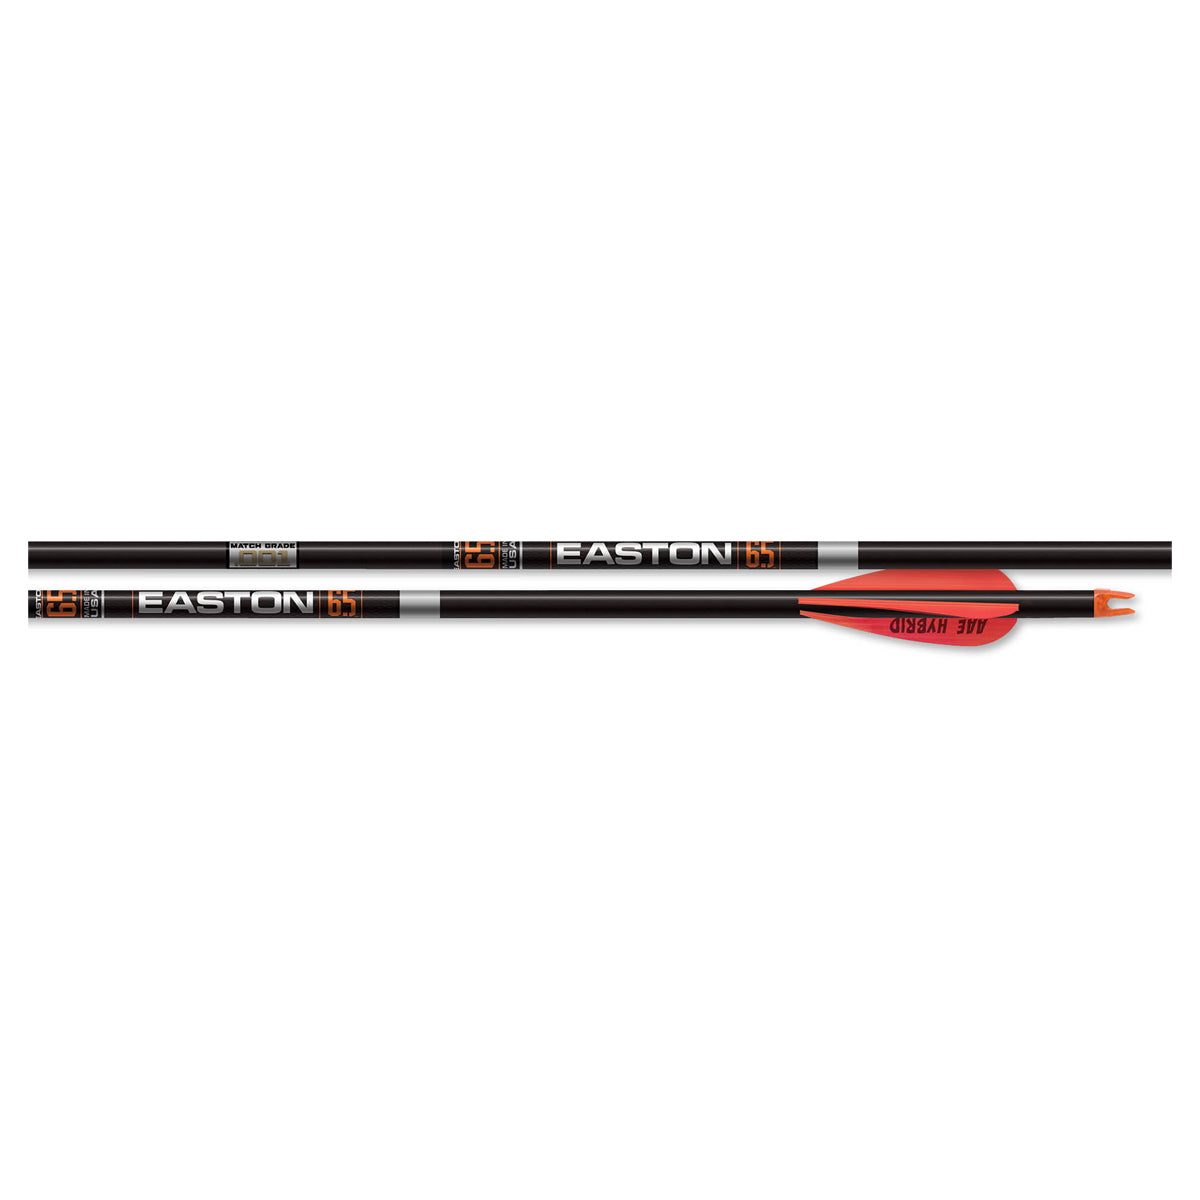 Easton 6.5 Match Grade Pro Series Pre-Fletched Arrow Shafts - 6 Count in  by GOHUNT | Easton - GOHUNT Shop